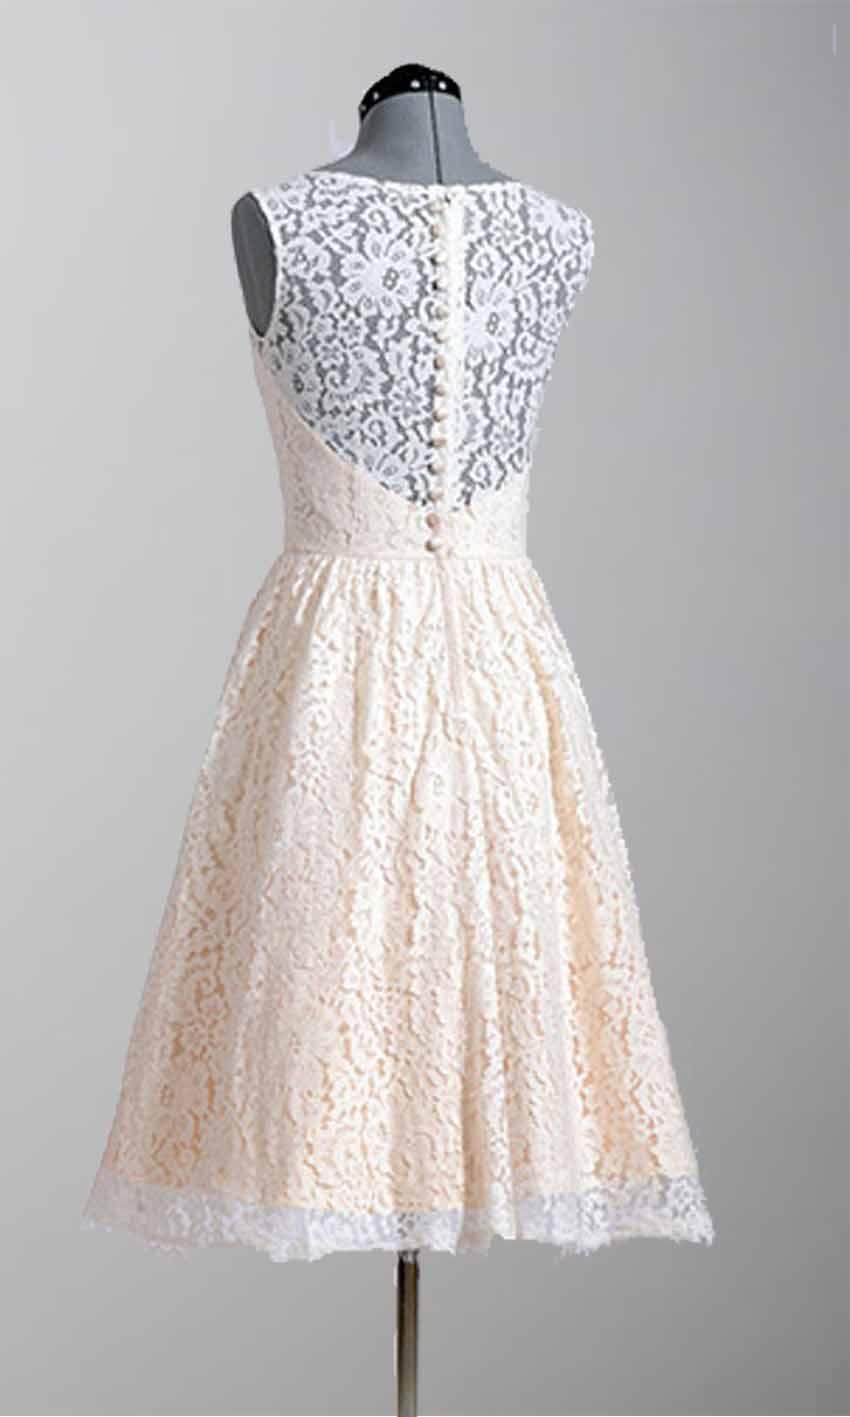 Hochzeit - Knee Length Modern Lace Vintage Wedding Party Dresses KSP296 [KSP296] - £89.00 : Cheap Prom Dresses Uk, Bridesmaid Dresses, 2014 Prom & Evening Dresses, Look for cheap elegant prom dresses 2014, cocktail gowns, or dresses for special occasions? kissprom.c